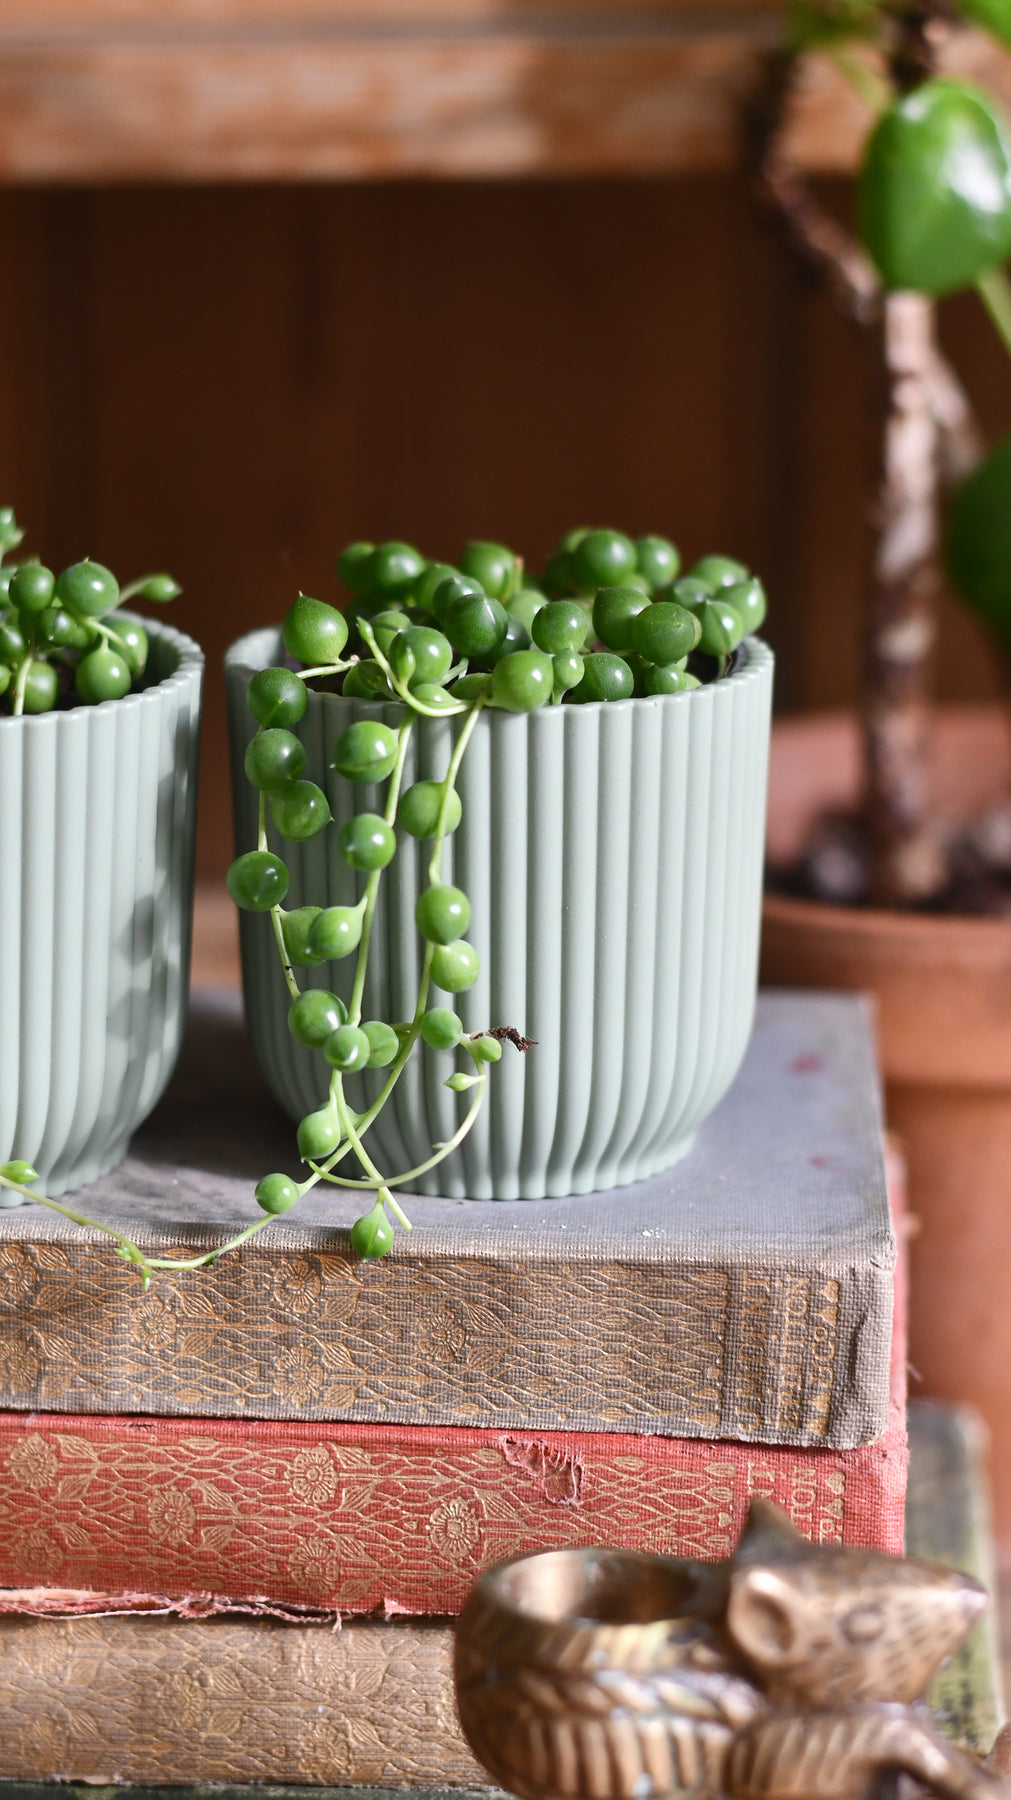 how to care for senecio rowleyanus 'string of pearls' - Leafy Life